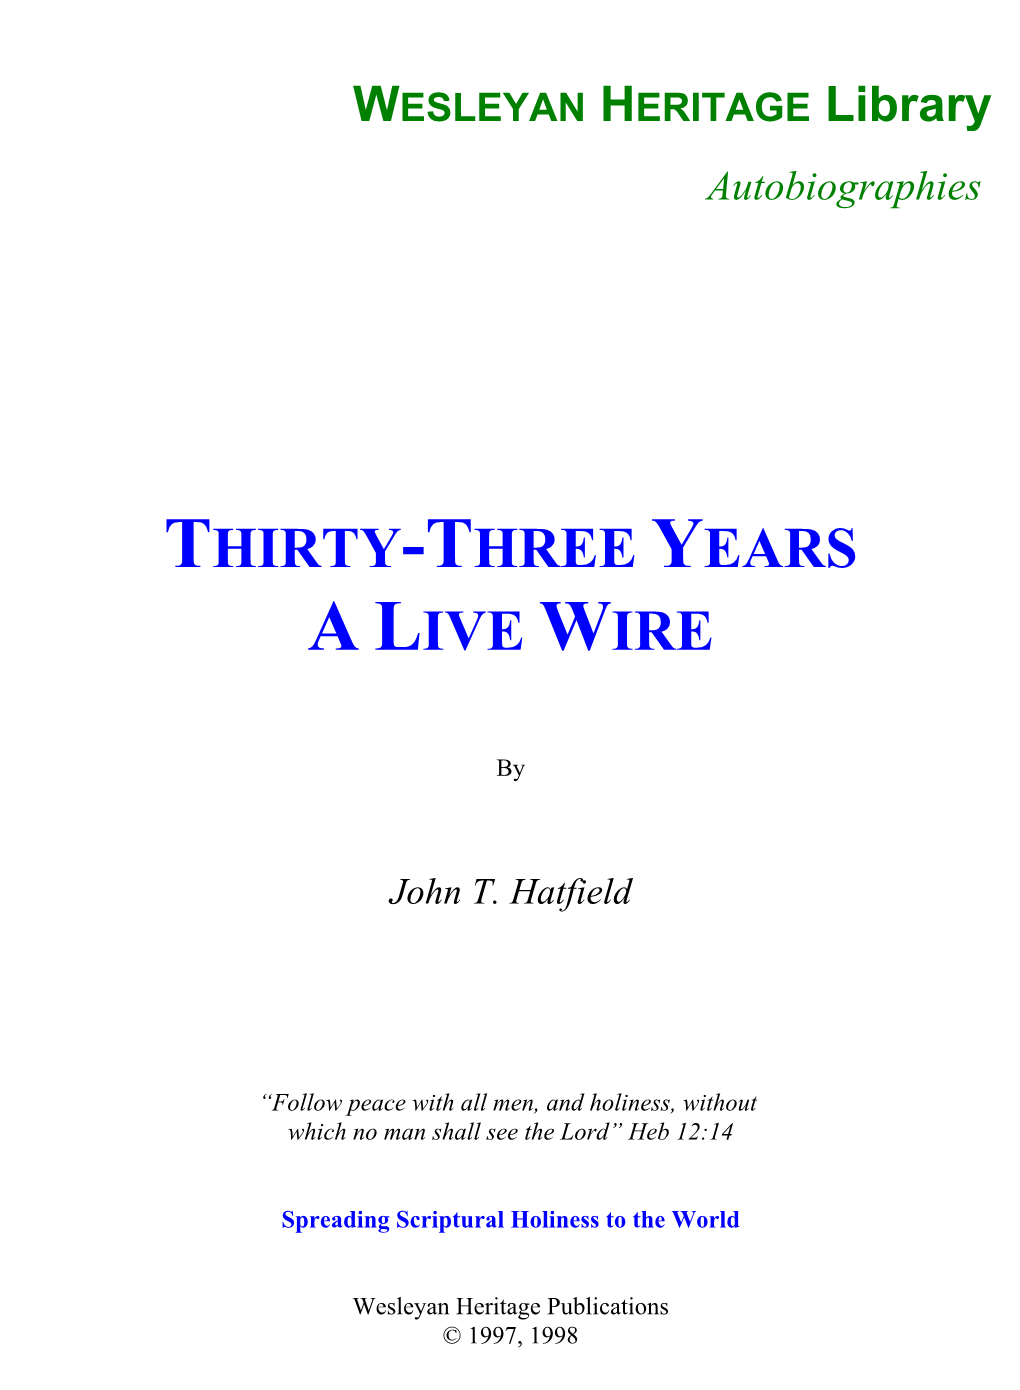 Thirty-Three Years a Live Wire